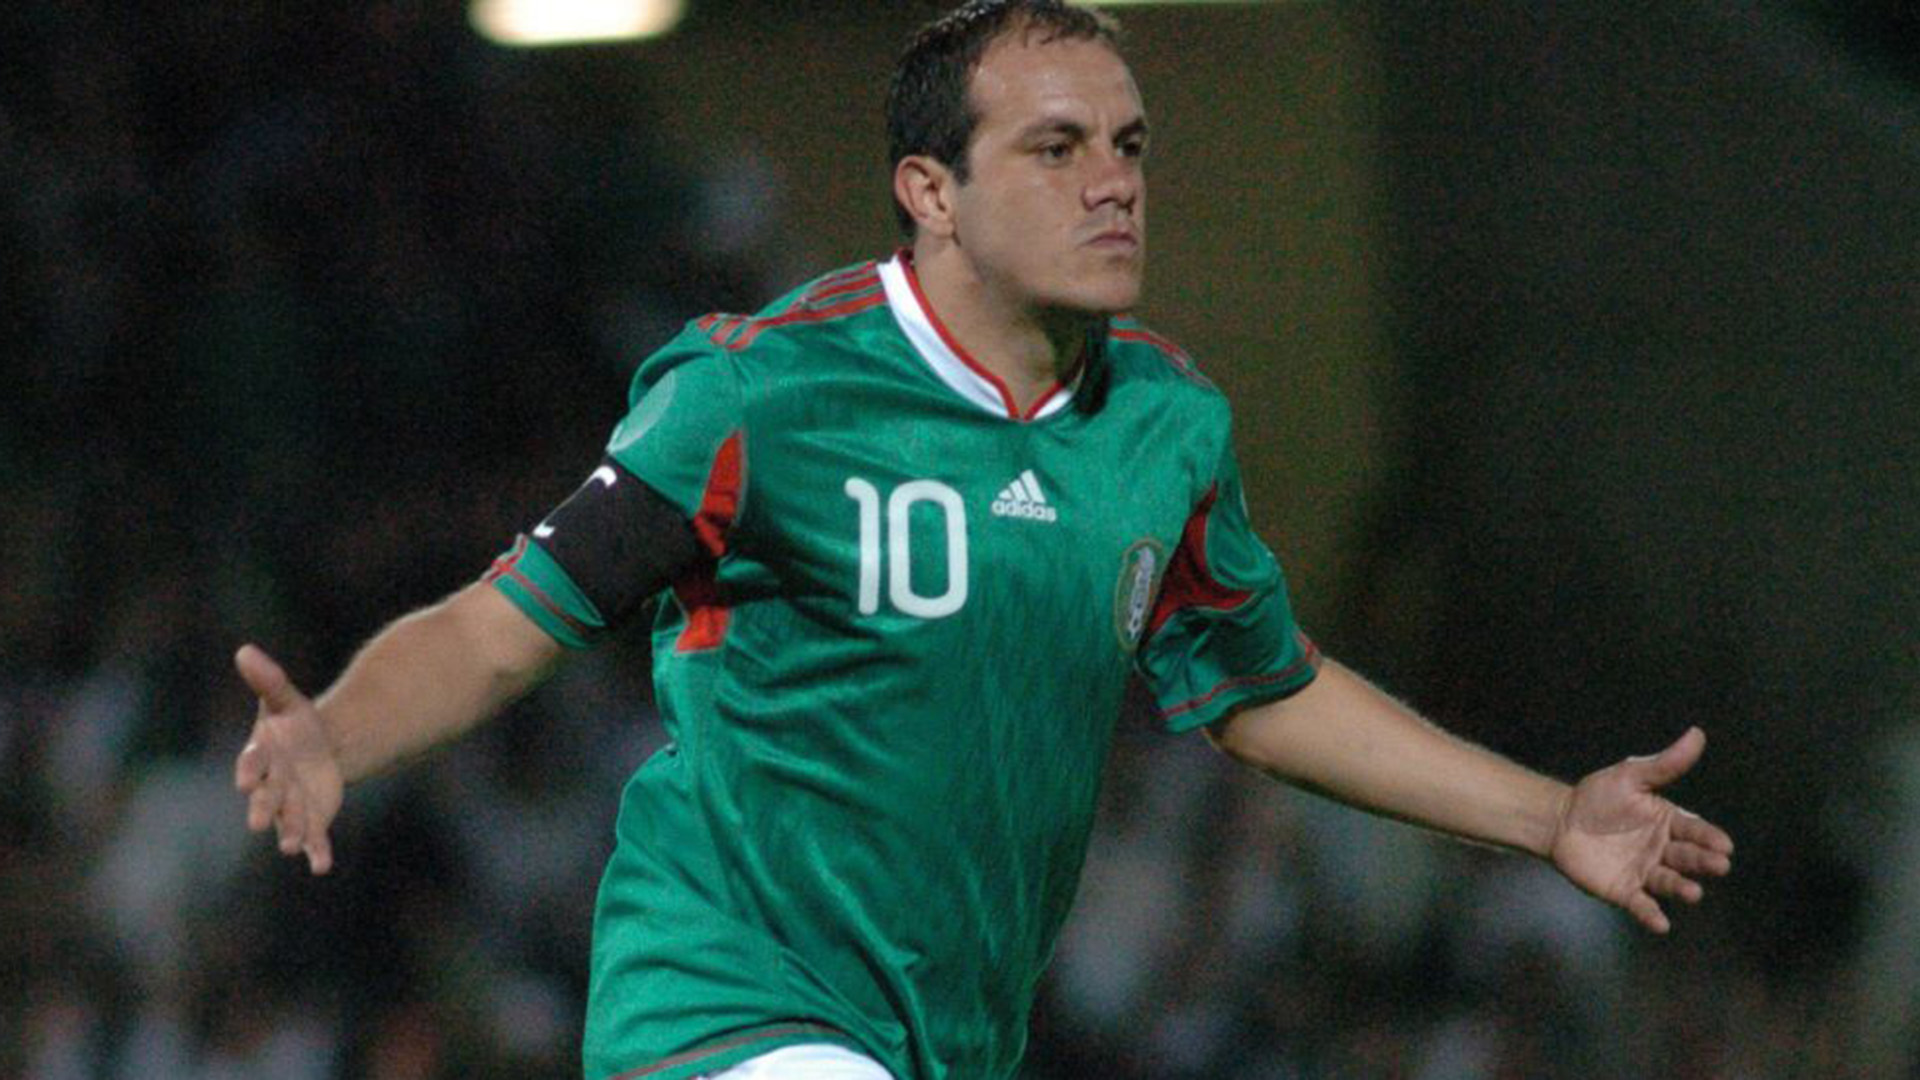 Cuauhtémoc Blanco, current governor of Morelos, was one of the best soccer players in the country. PHOTO: RAMÓN SOTOMAYOR/CUARTOSCURO.COM